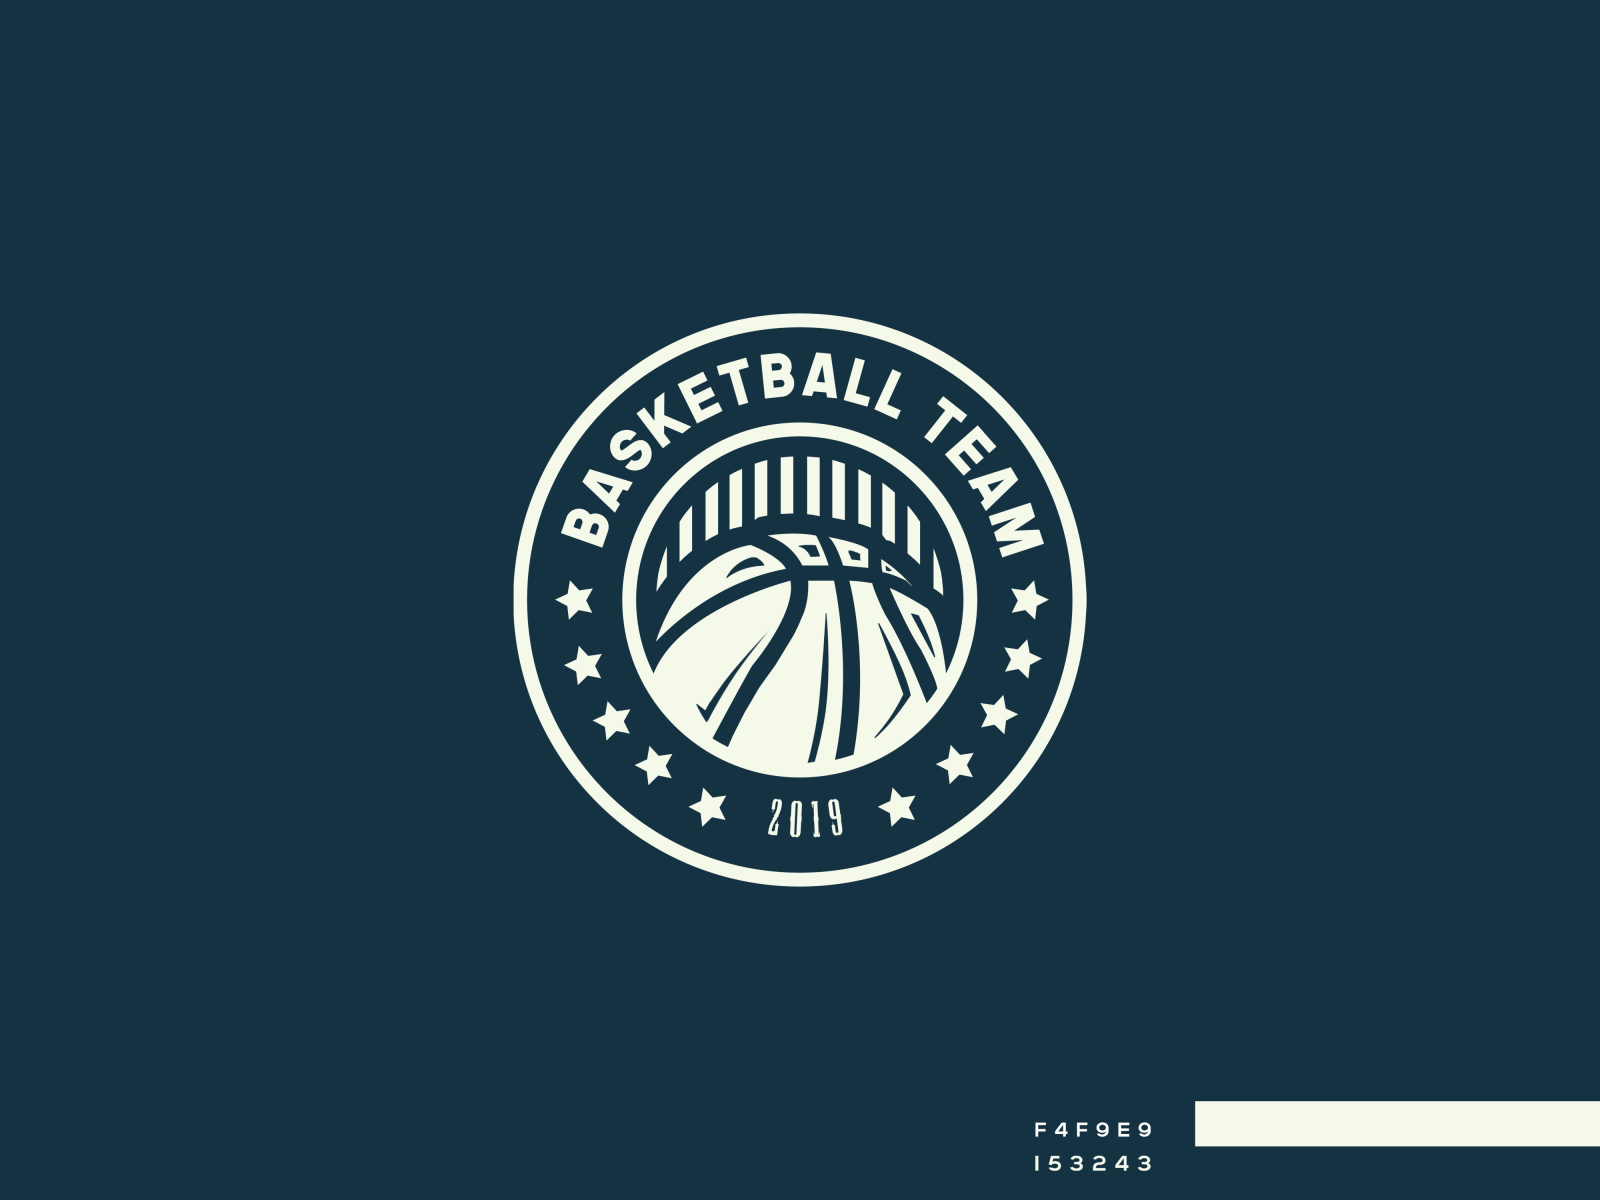 Vintage Basketball Logo By Derouiche Mehdi On Dribbble,30 Gram Gold Necklace Designs With Indian Price